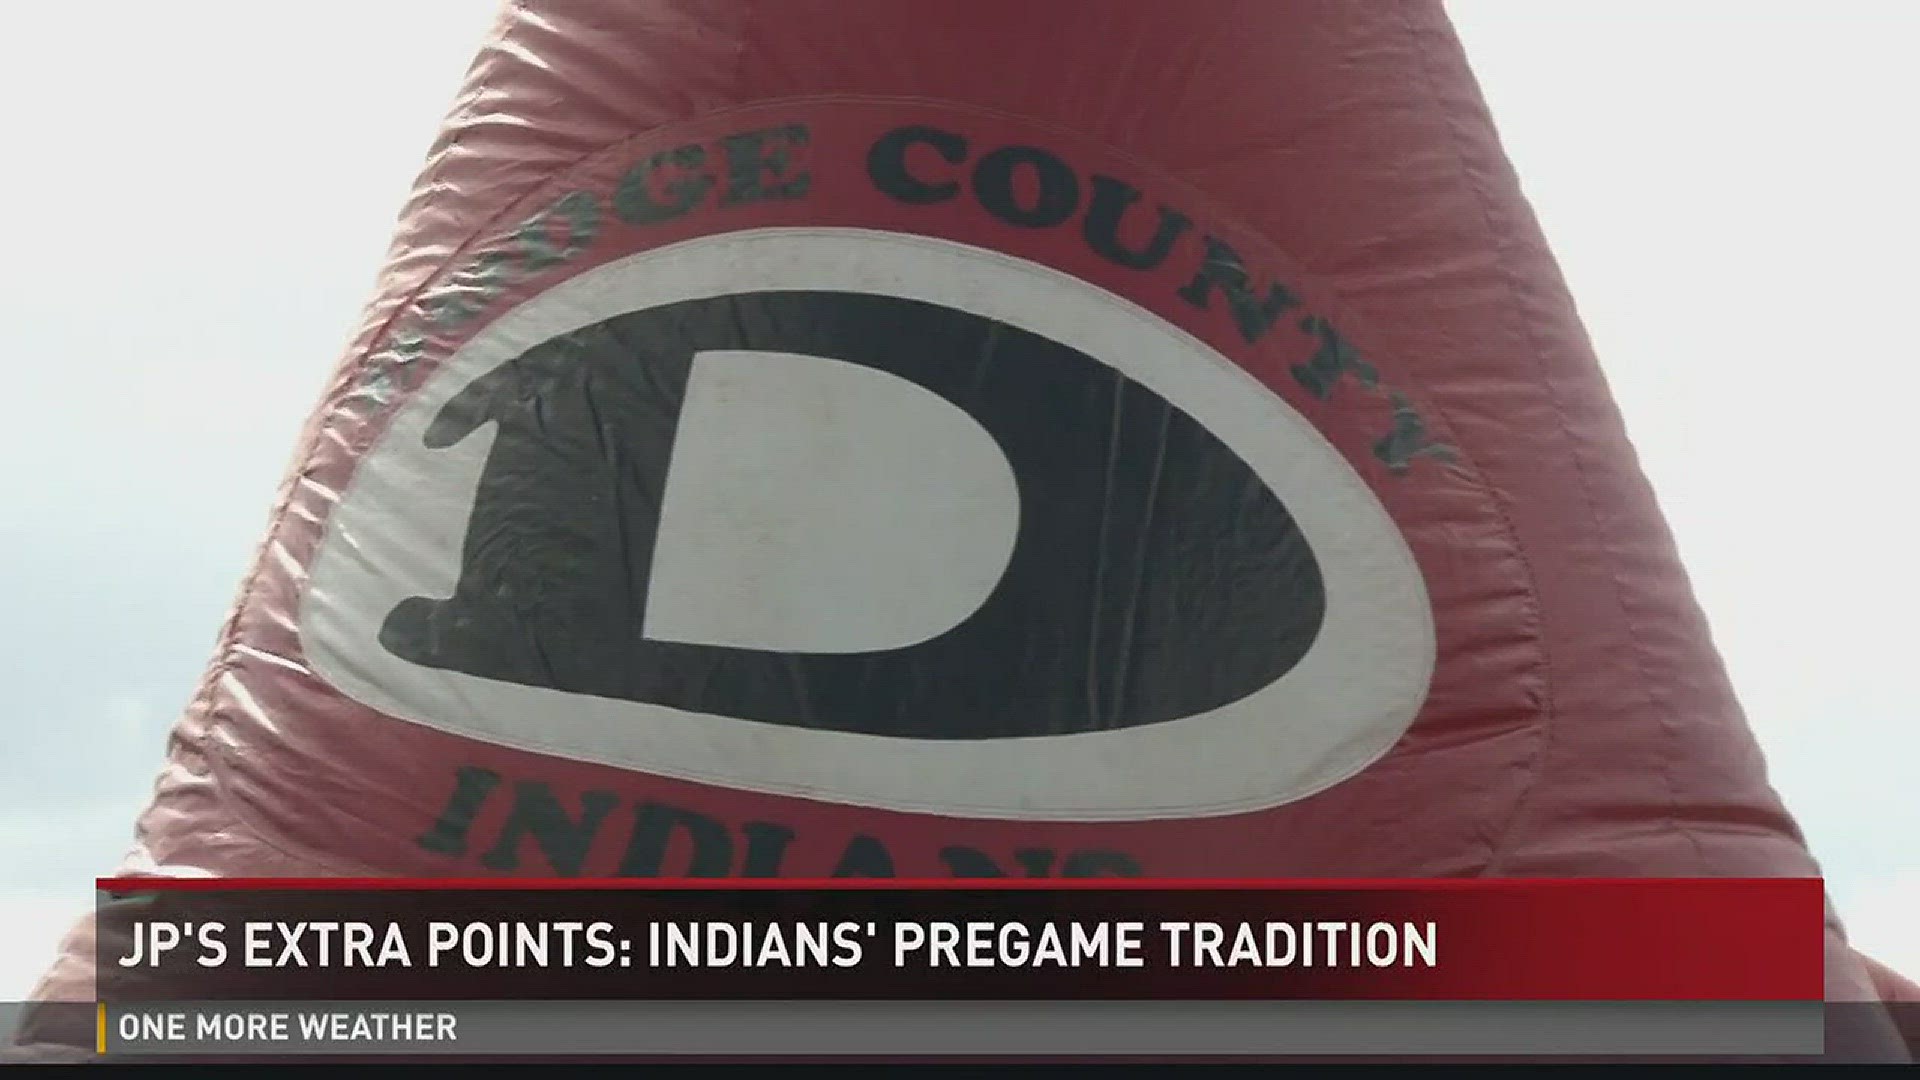 #tailgate13: JP's Extra Points: Indians' pregame tradition